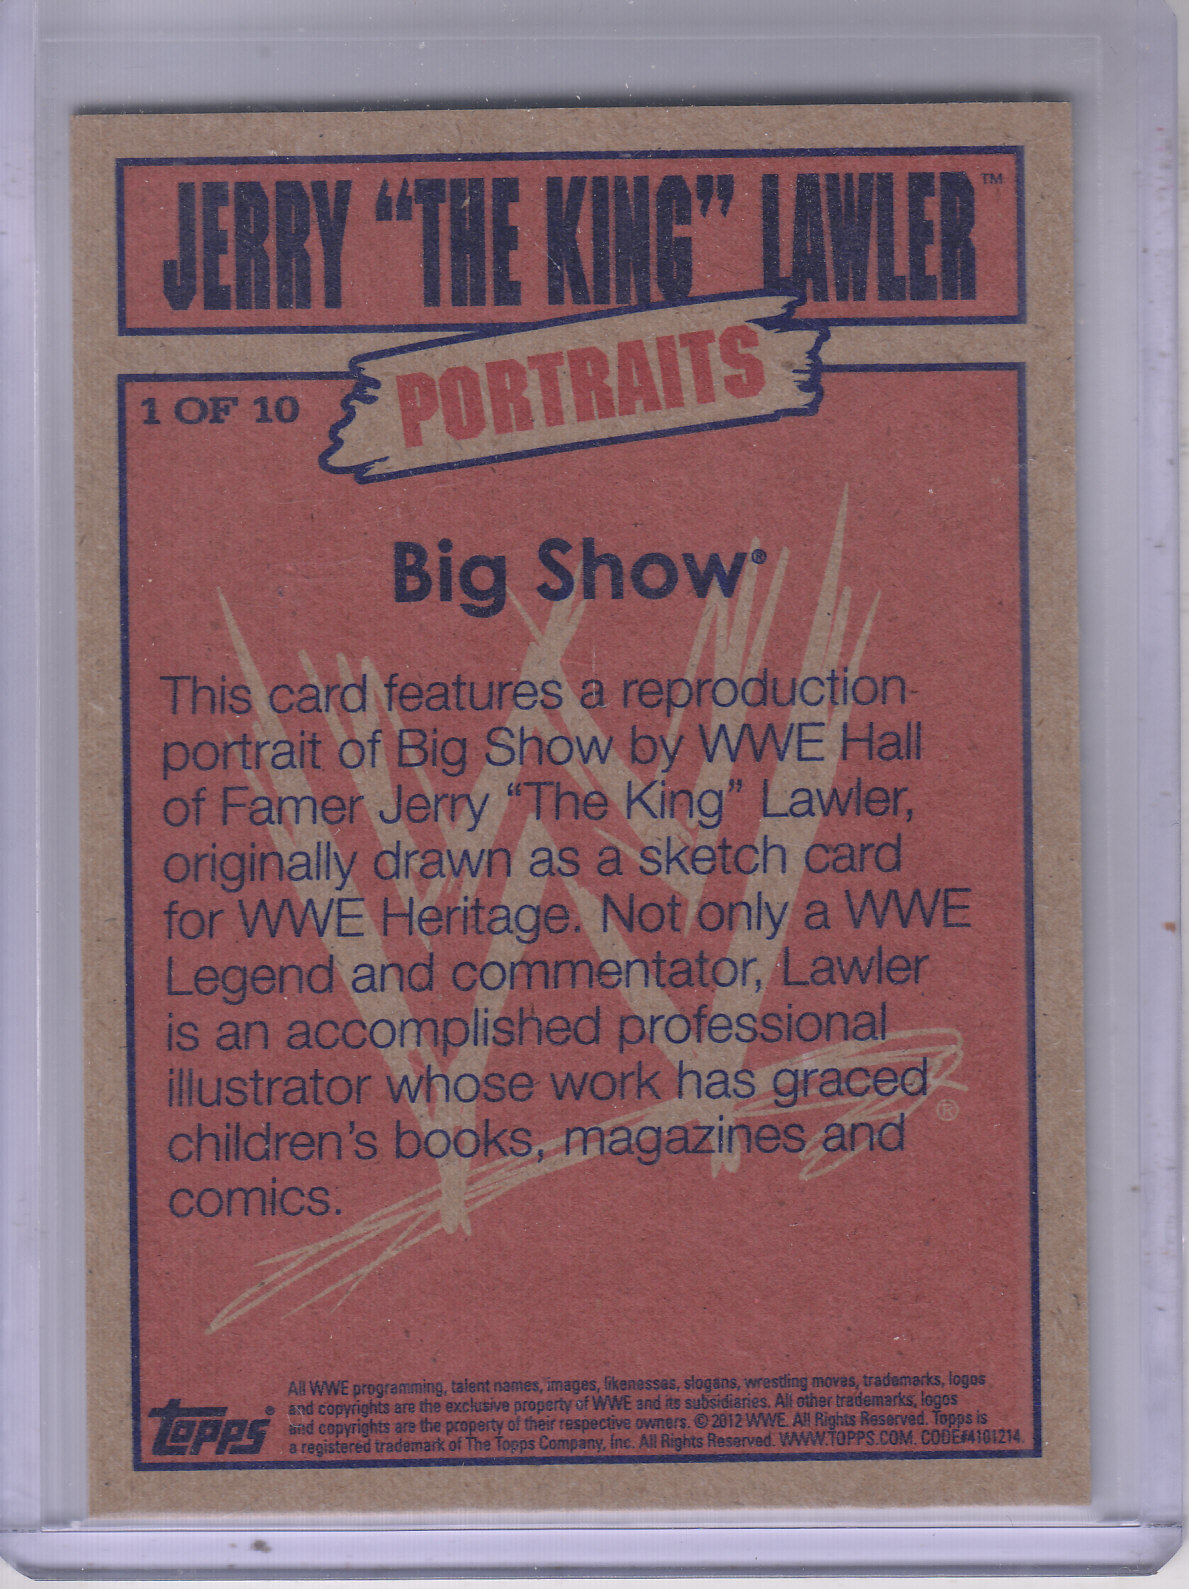 2012 Topps Heritage WWE Jerry the King Lawler Portraits #1 Big Show back image